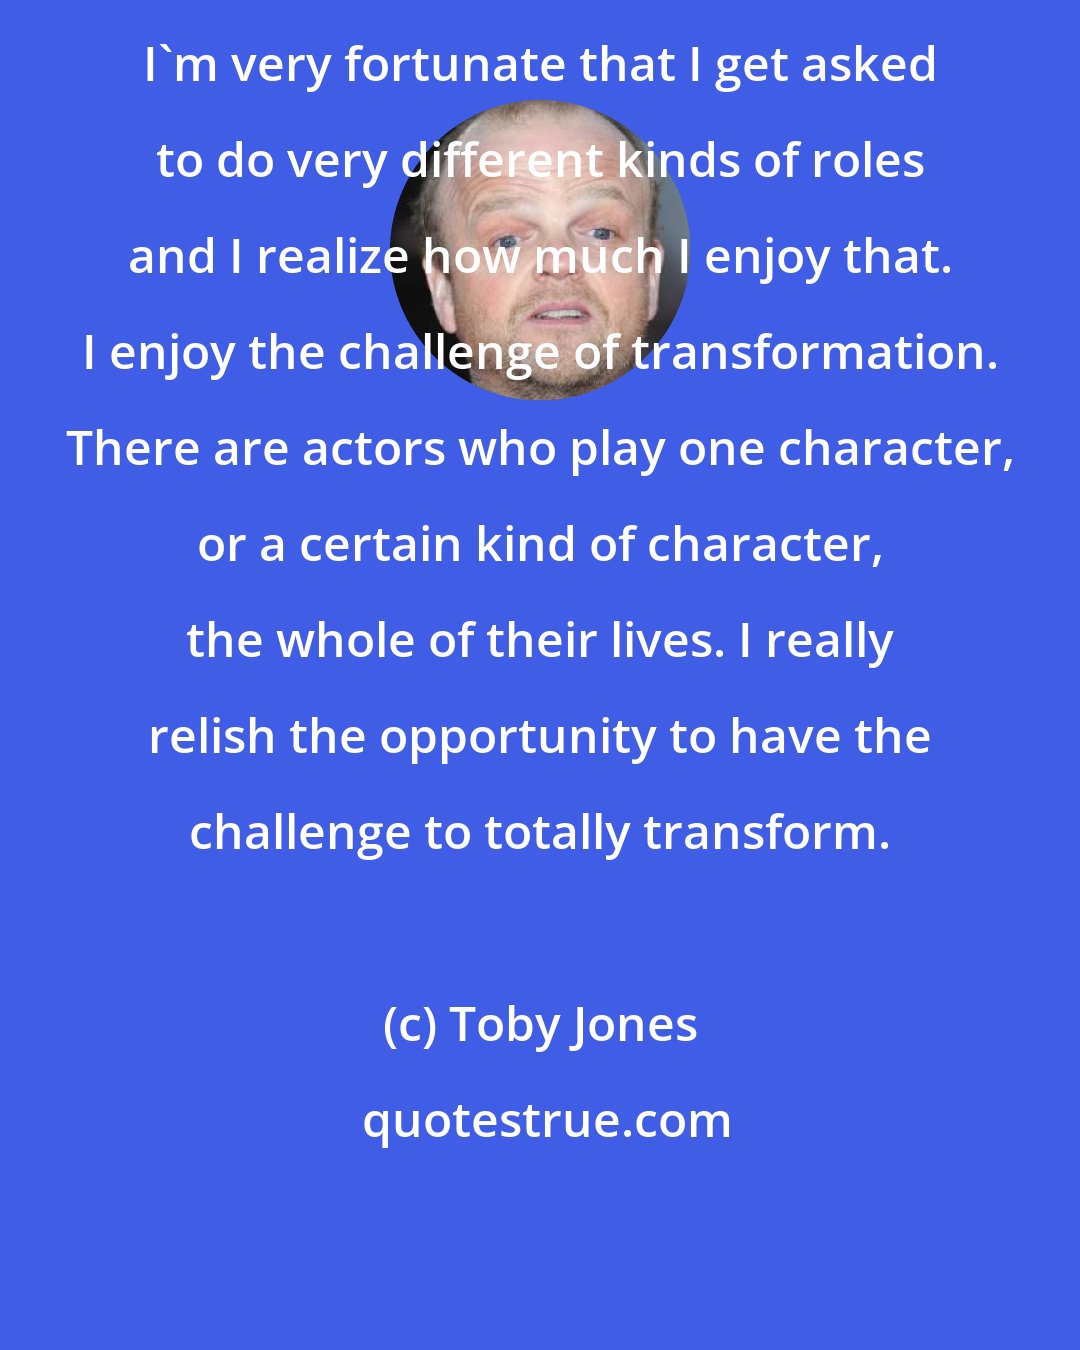 Toby Jones: I'm very fortunate that I get asked to do very different kinds of roles and I realize how much I enjoy that. I enjoy the challenge of transformation. There are actors who play one character, or a certain kind of character, the whole of their lives. I really relish the opportunity to have the challenge to totally transform.